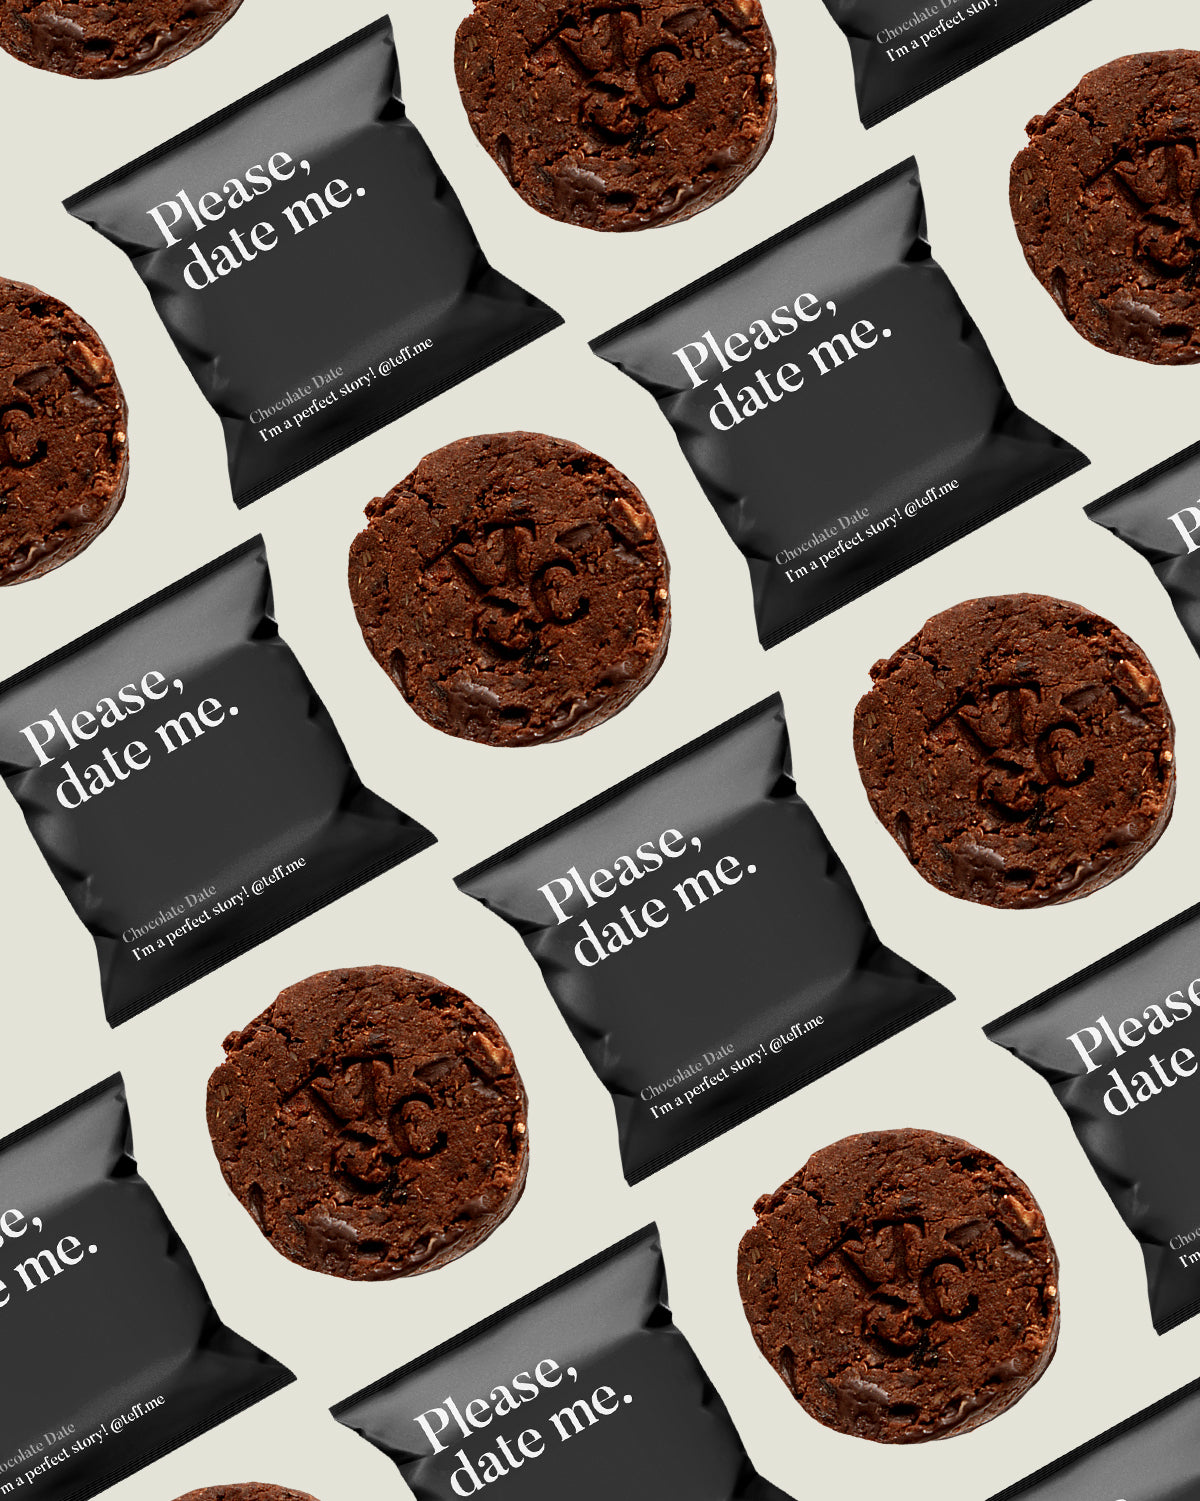 Chocolate Date Teff Cookie with Date Me Packaging